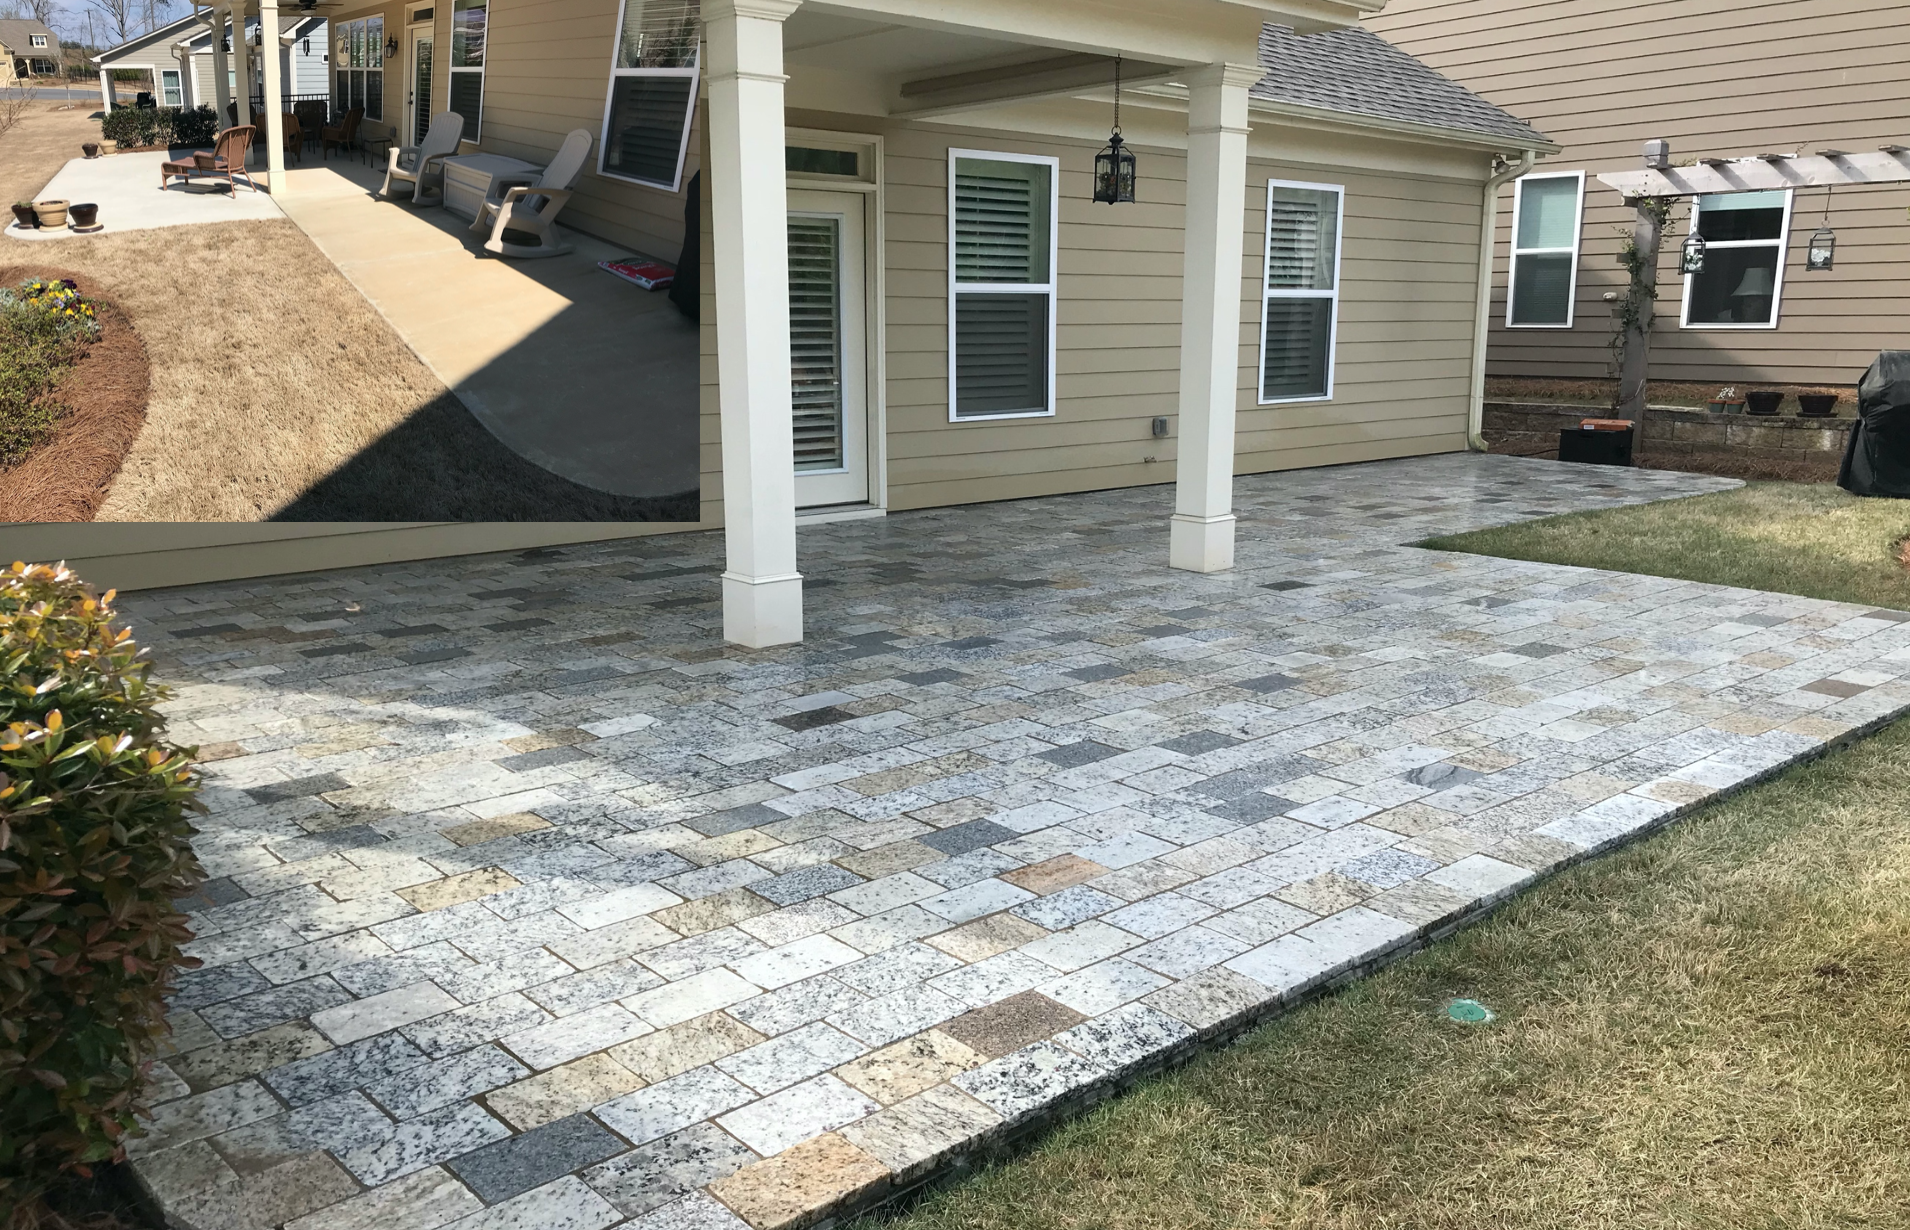 Donât Remove that Concrete Slab! Overlay it with Granite Pavers ...